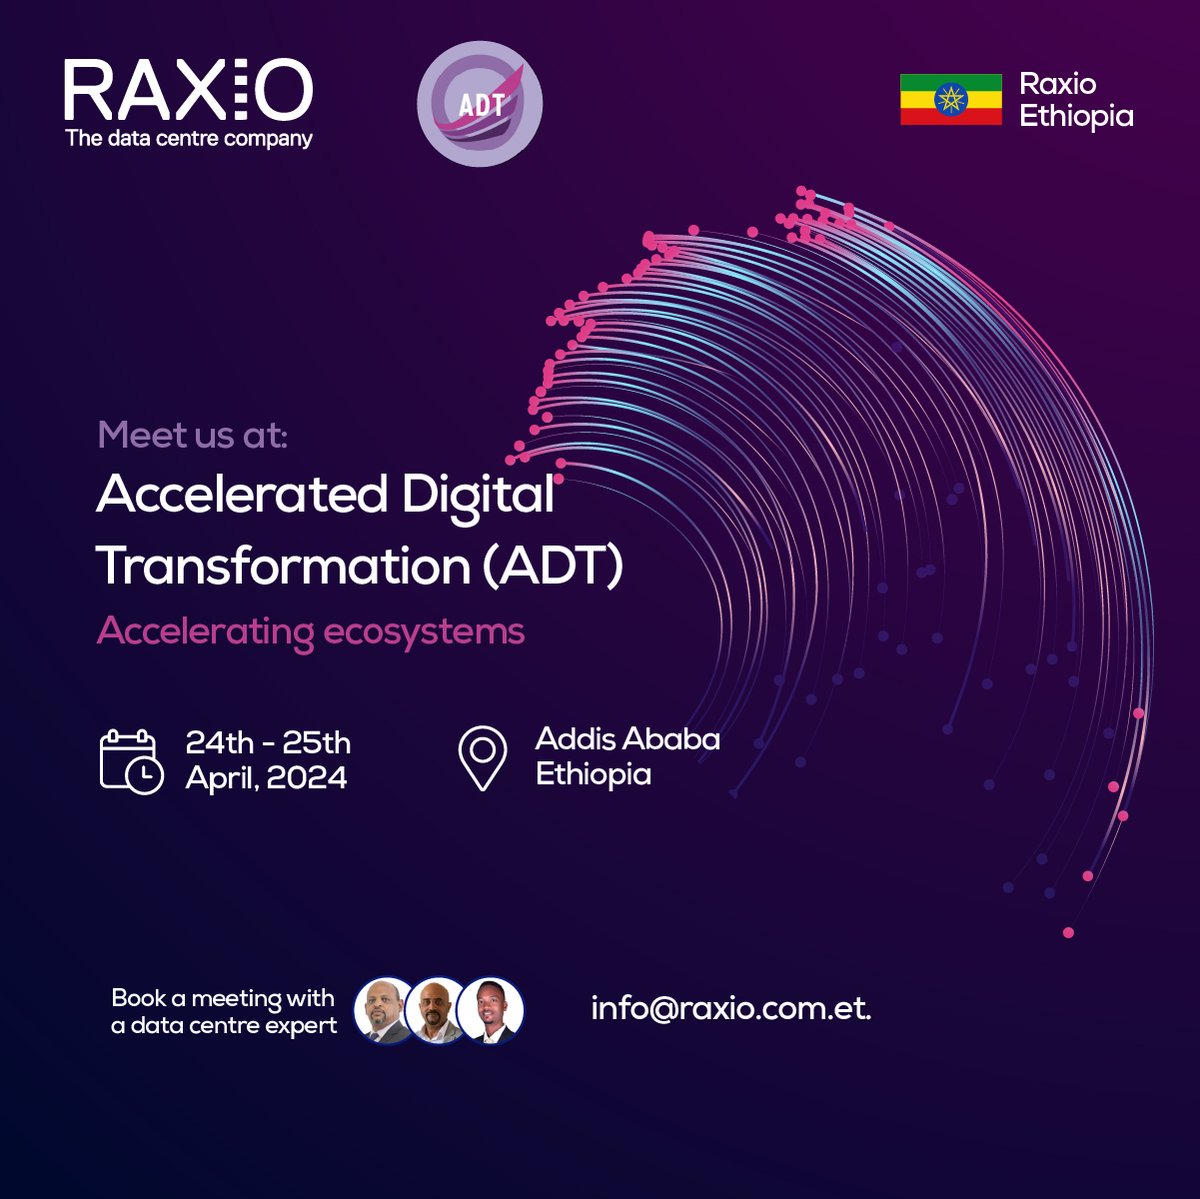 Join us at ADT, 2024 in Addis Ababa, Ethiopia! 🌐✨

Mark your calendar for 24th - 25th April 2024, and let's explore innovative ways to accelerate digital transformation across Africa.

To book a meeting, email us at info@raxio.com.et.

#ADT2024 #Raxio #RaxioEthiopia #Ethiopia